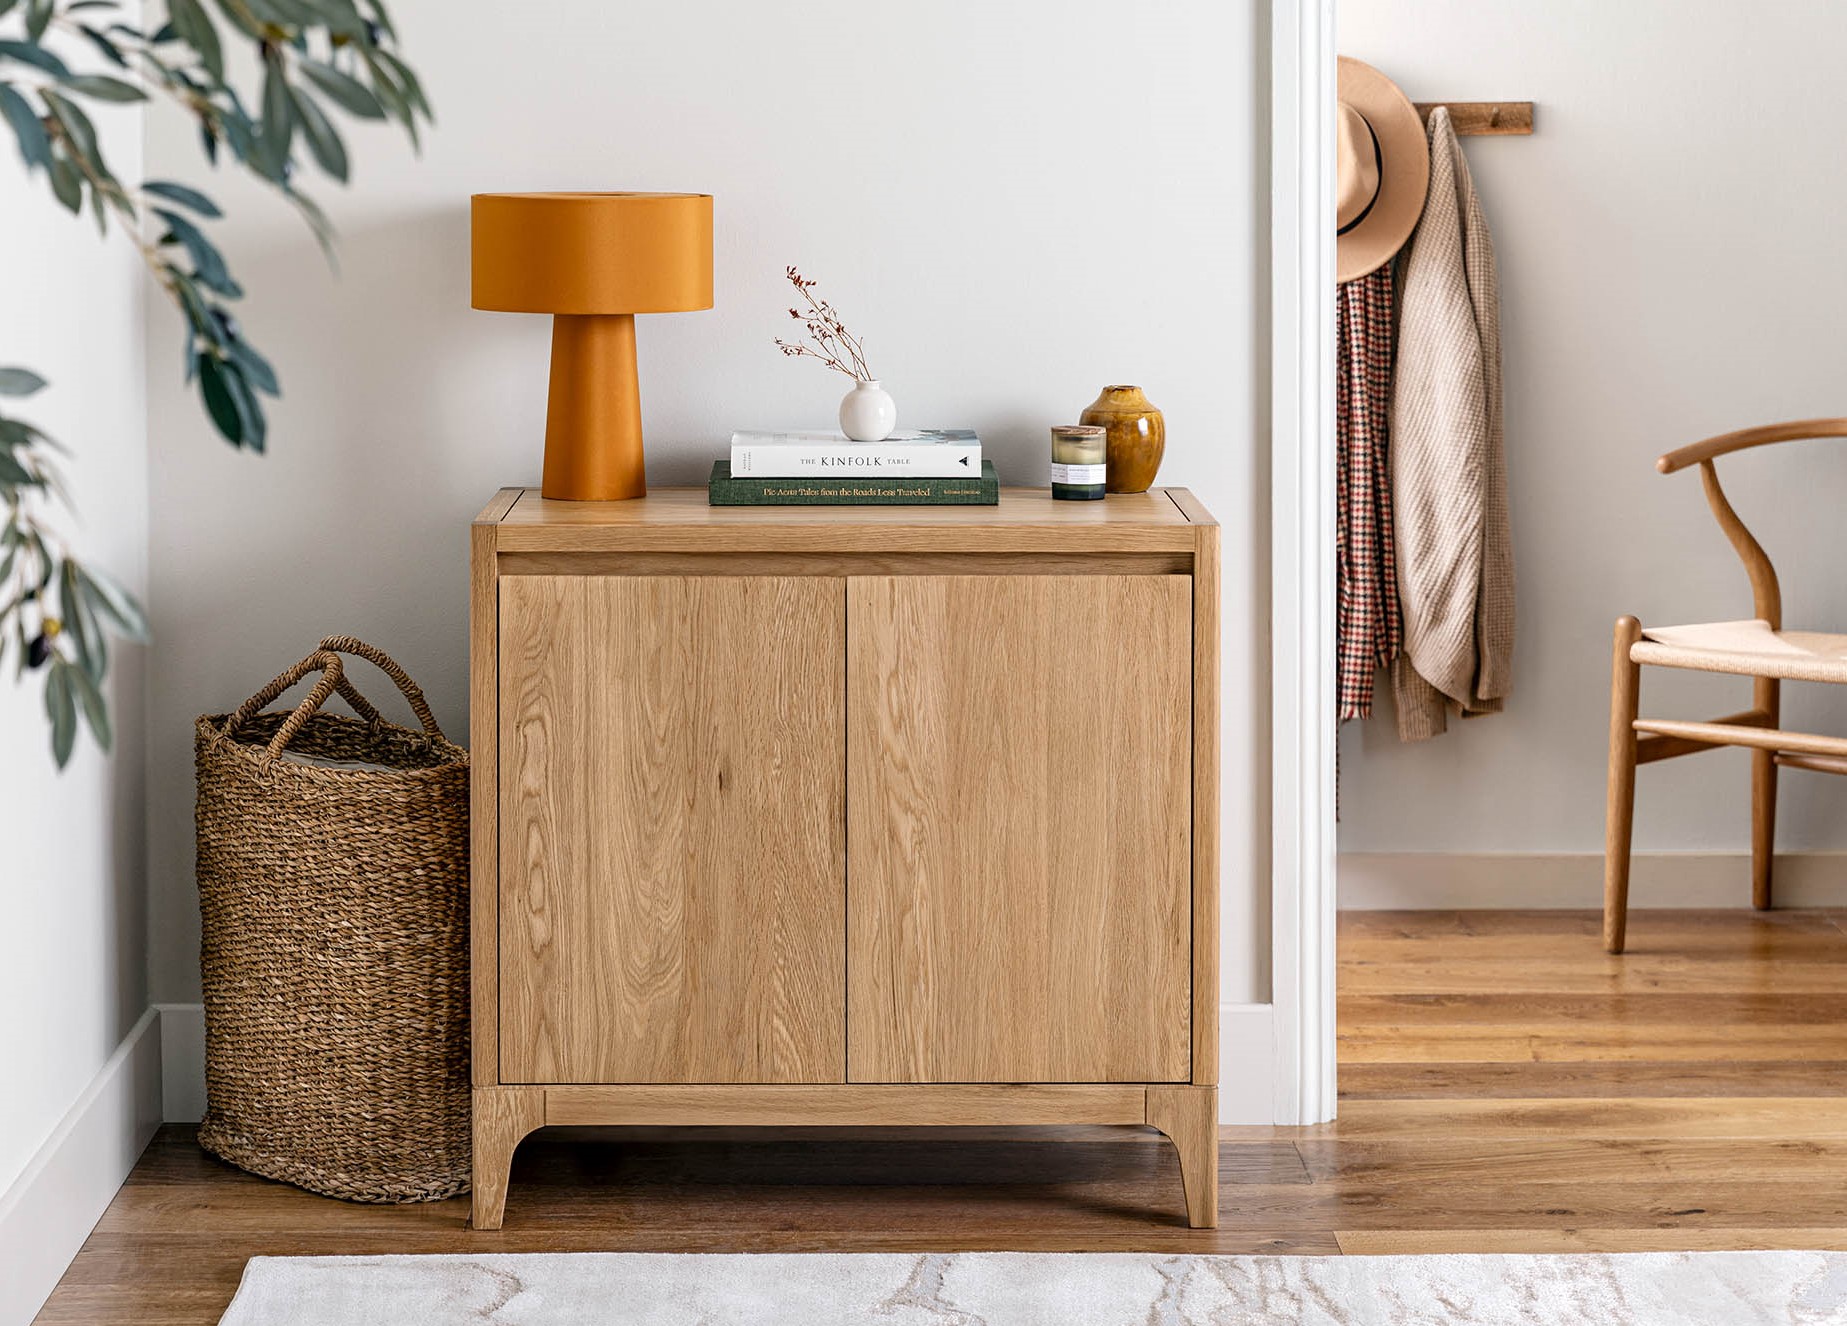 A sideboard-hallway furniture-small wooden sideboard-mustard lamp-wooden chair-coat hooks